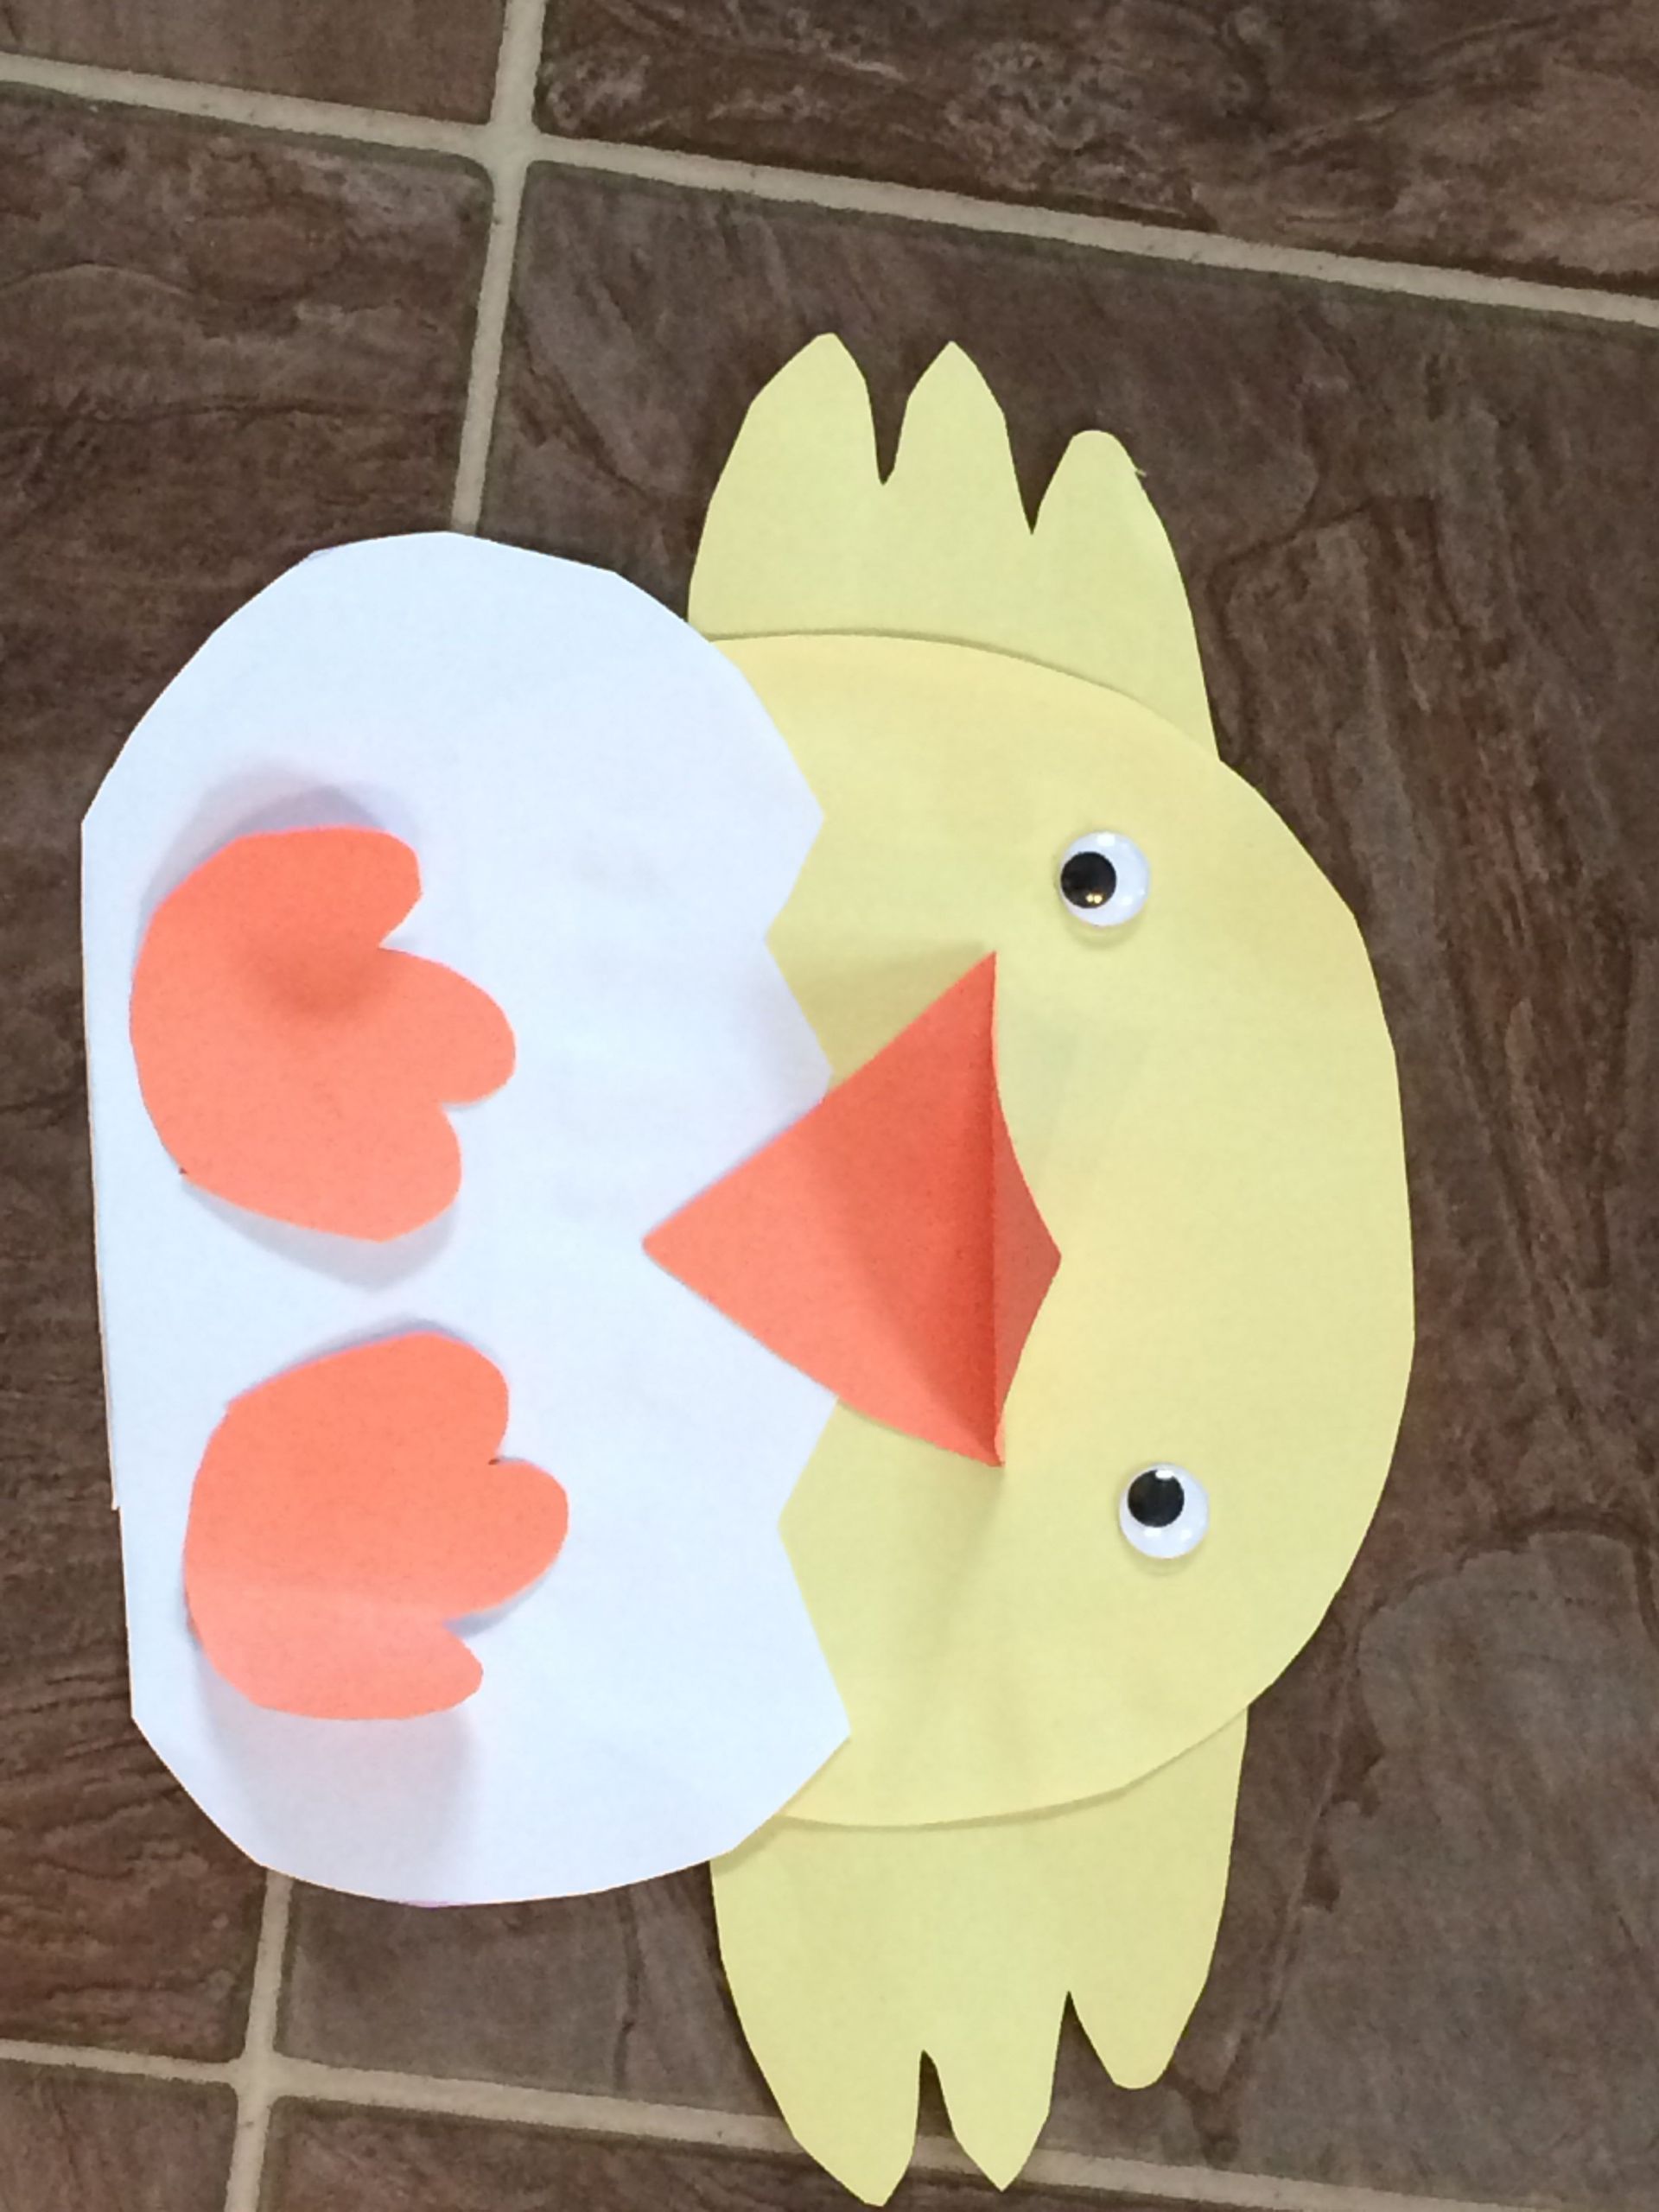 Construction Paper Easter Crafts
 Construction Paper Crafts For Easter papercraft essentials